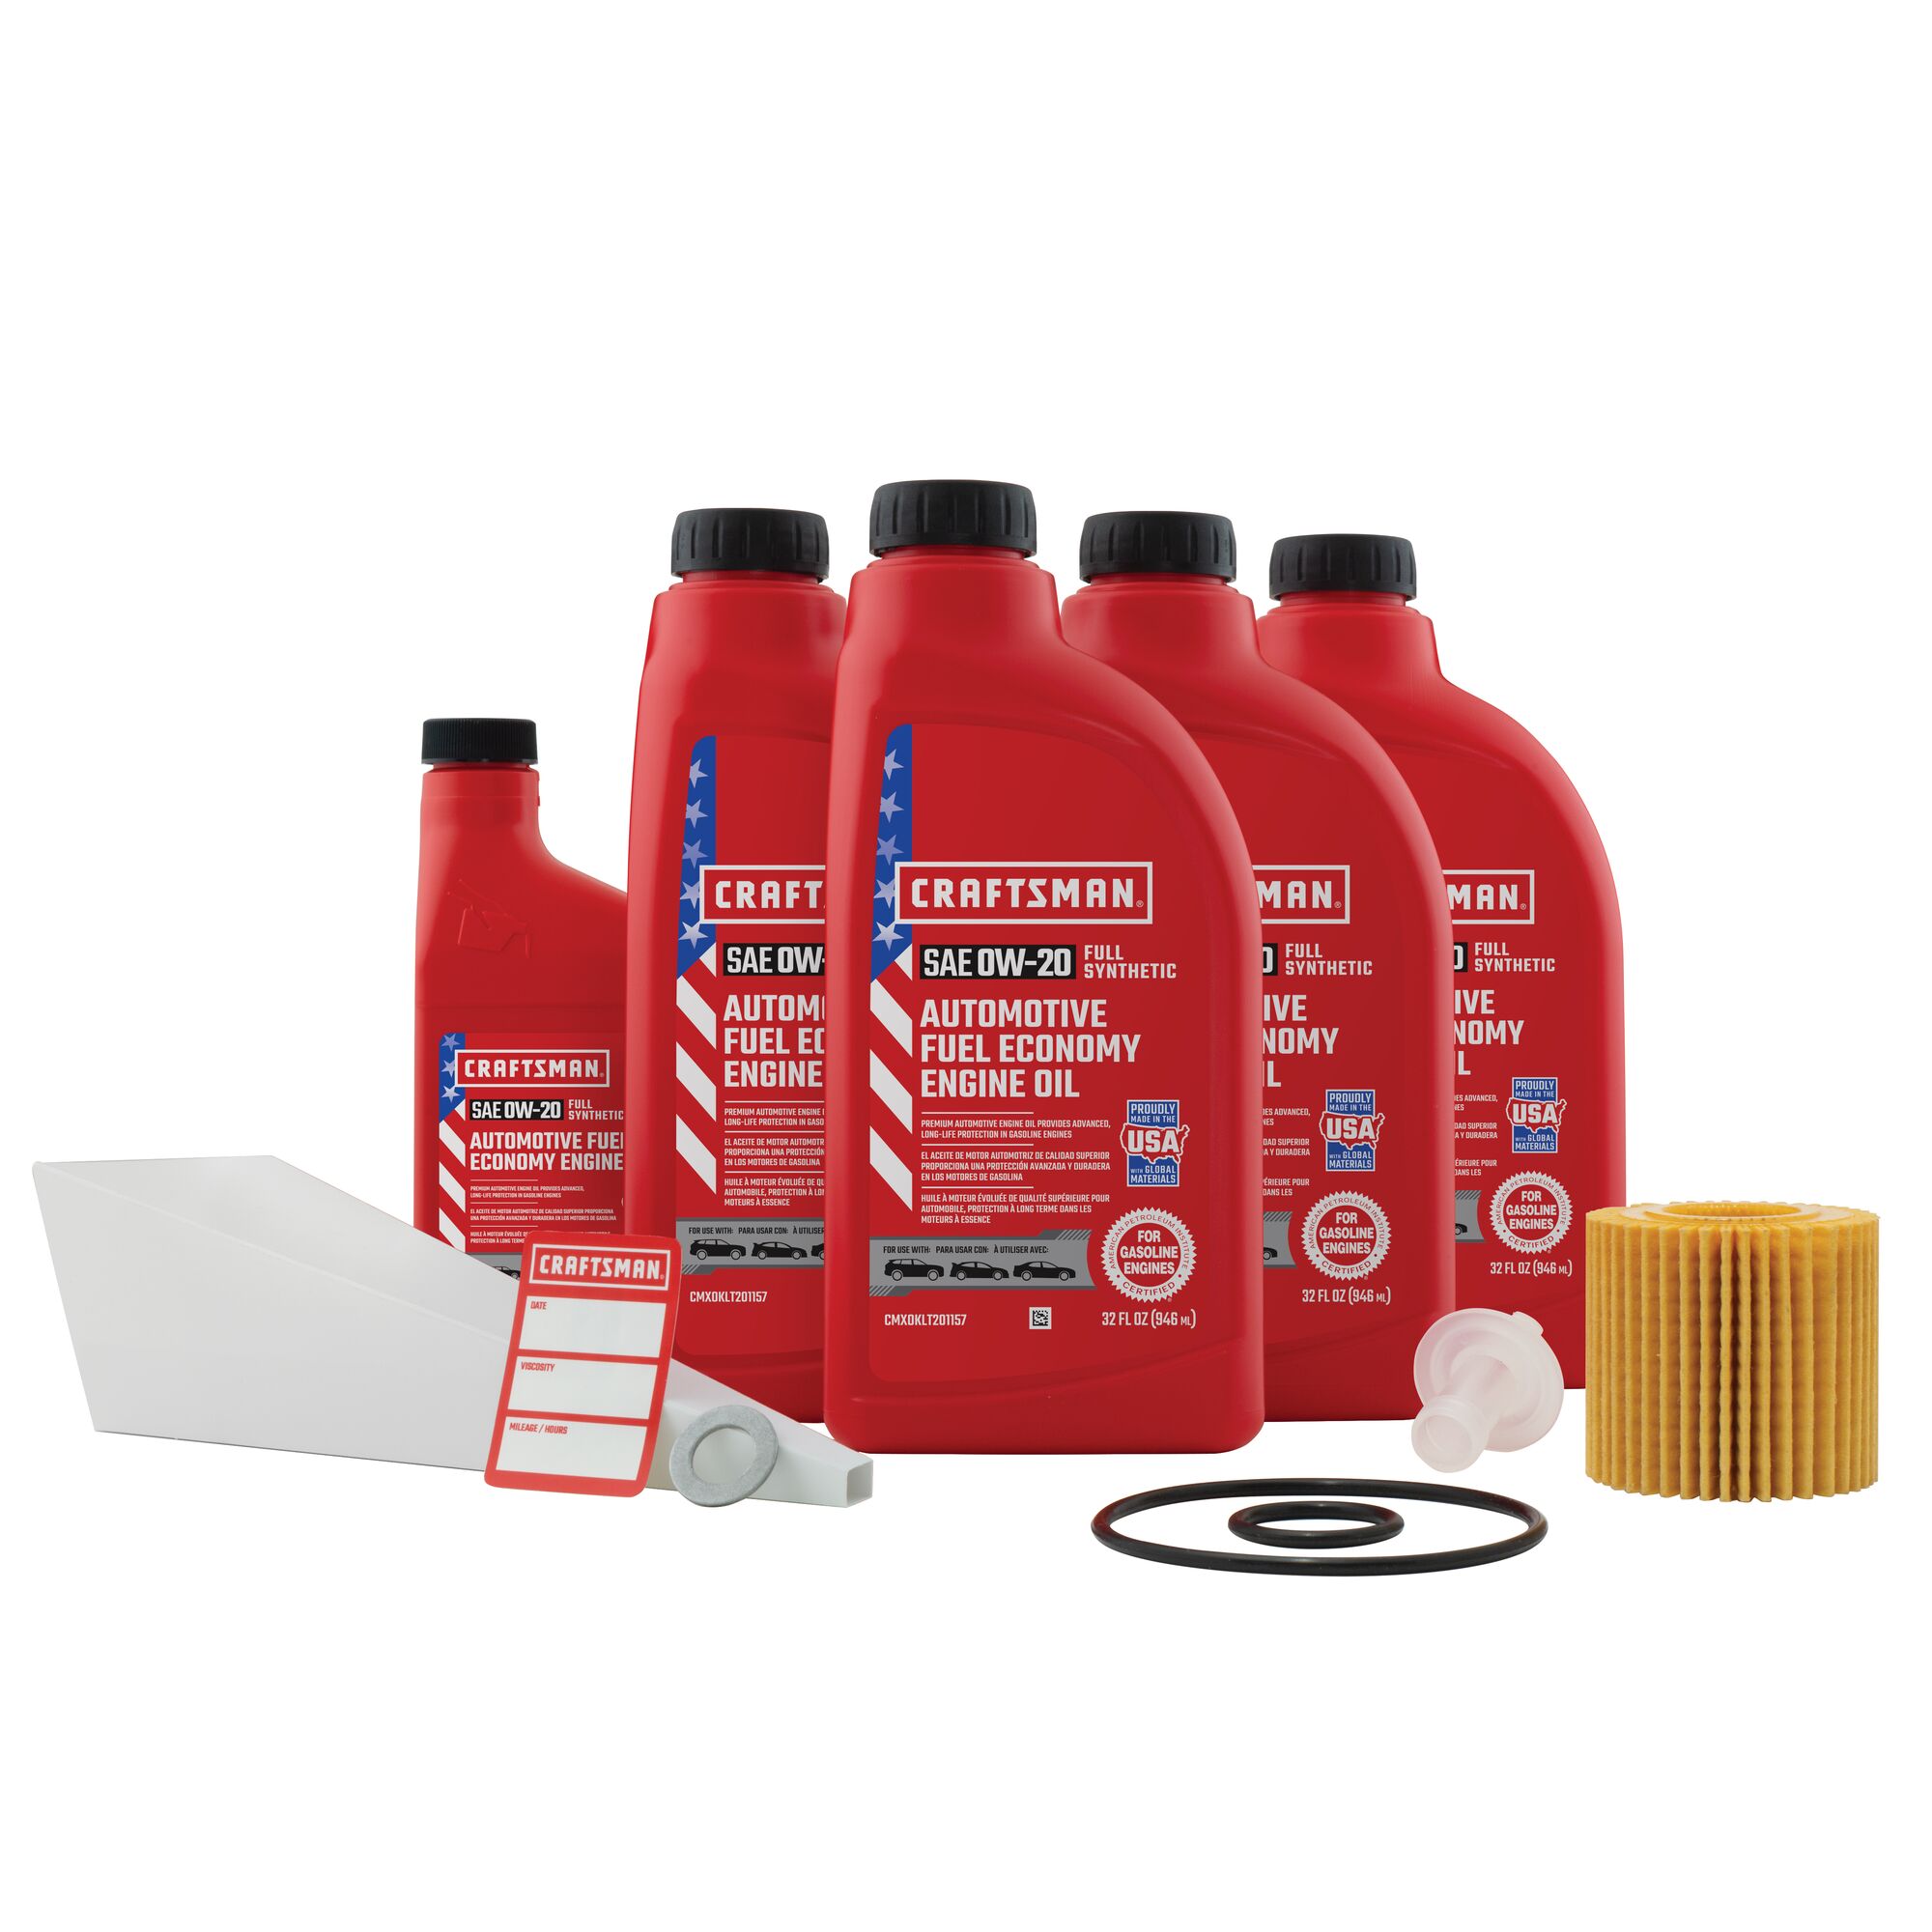 Oil change kit with oil filter, change sticker and oil funnel